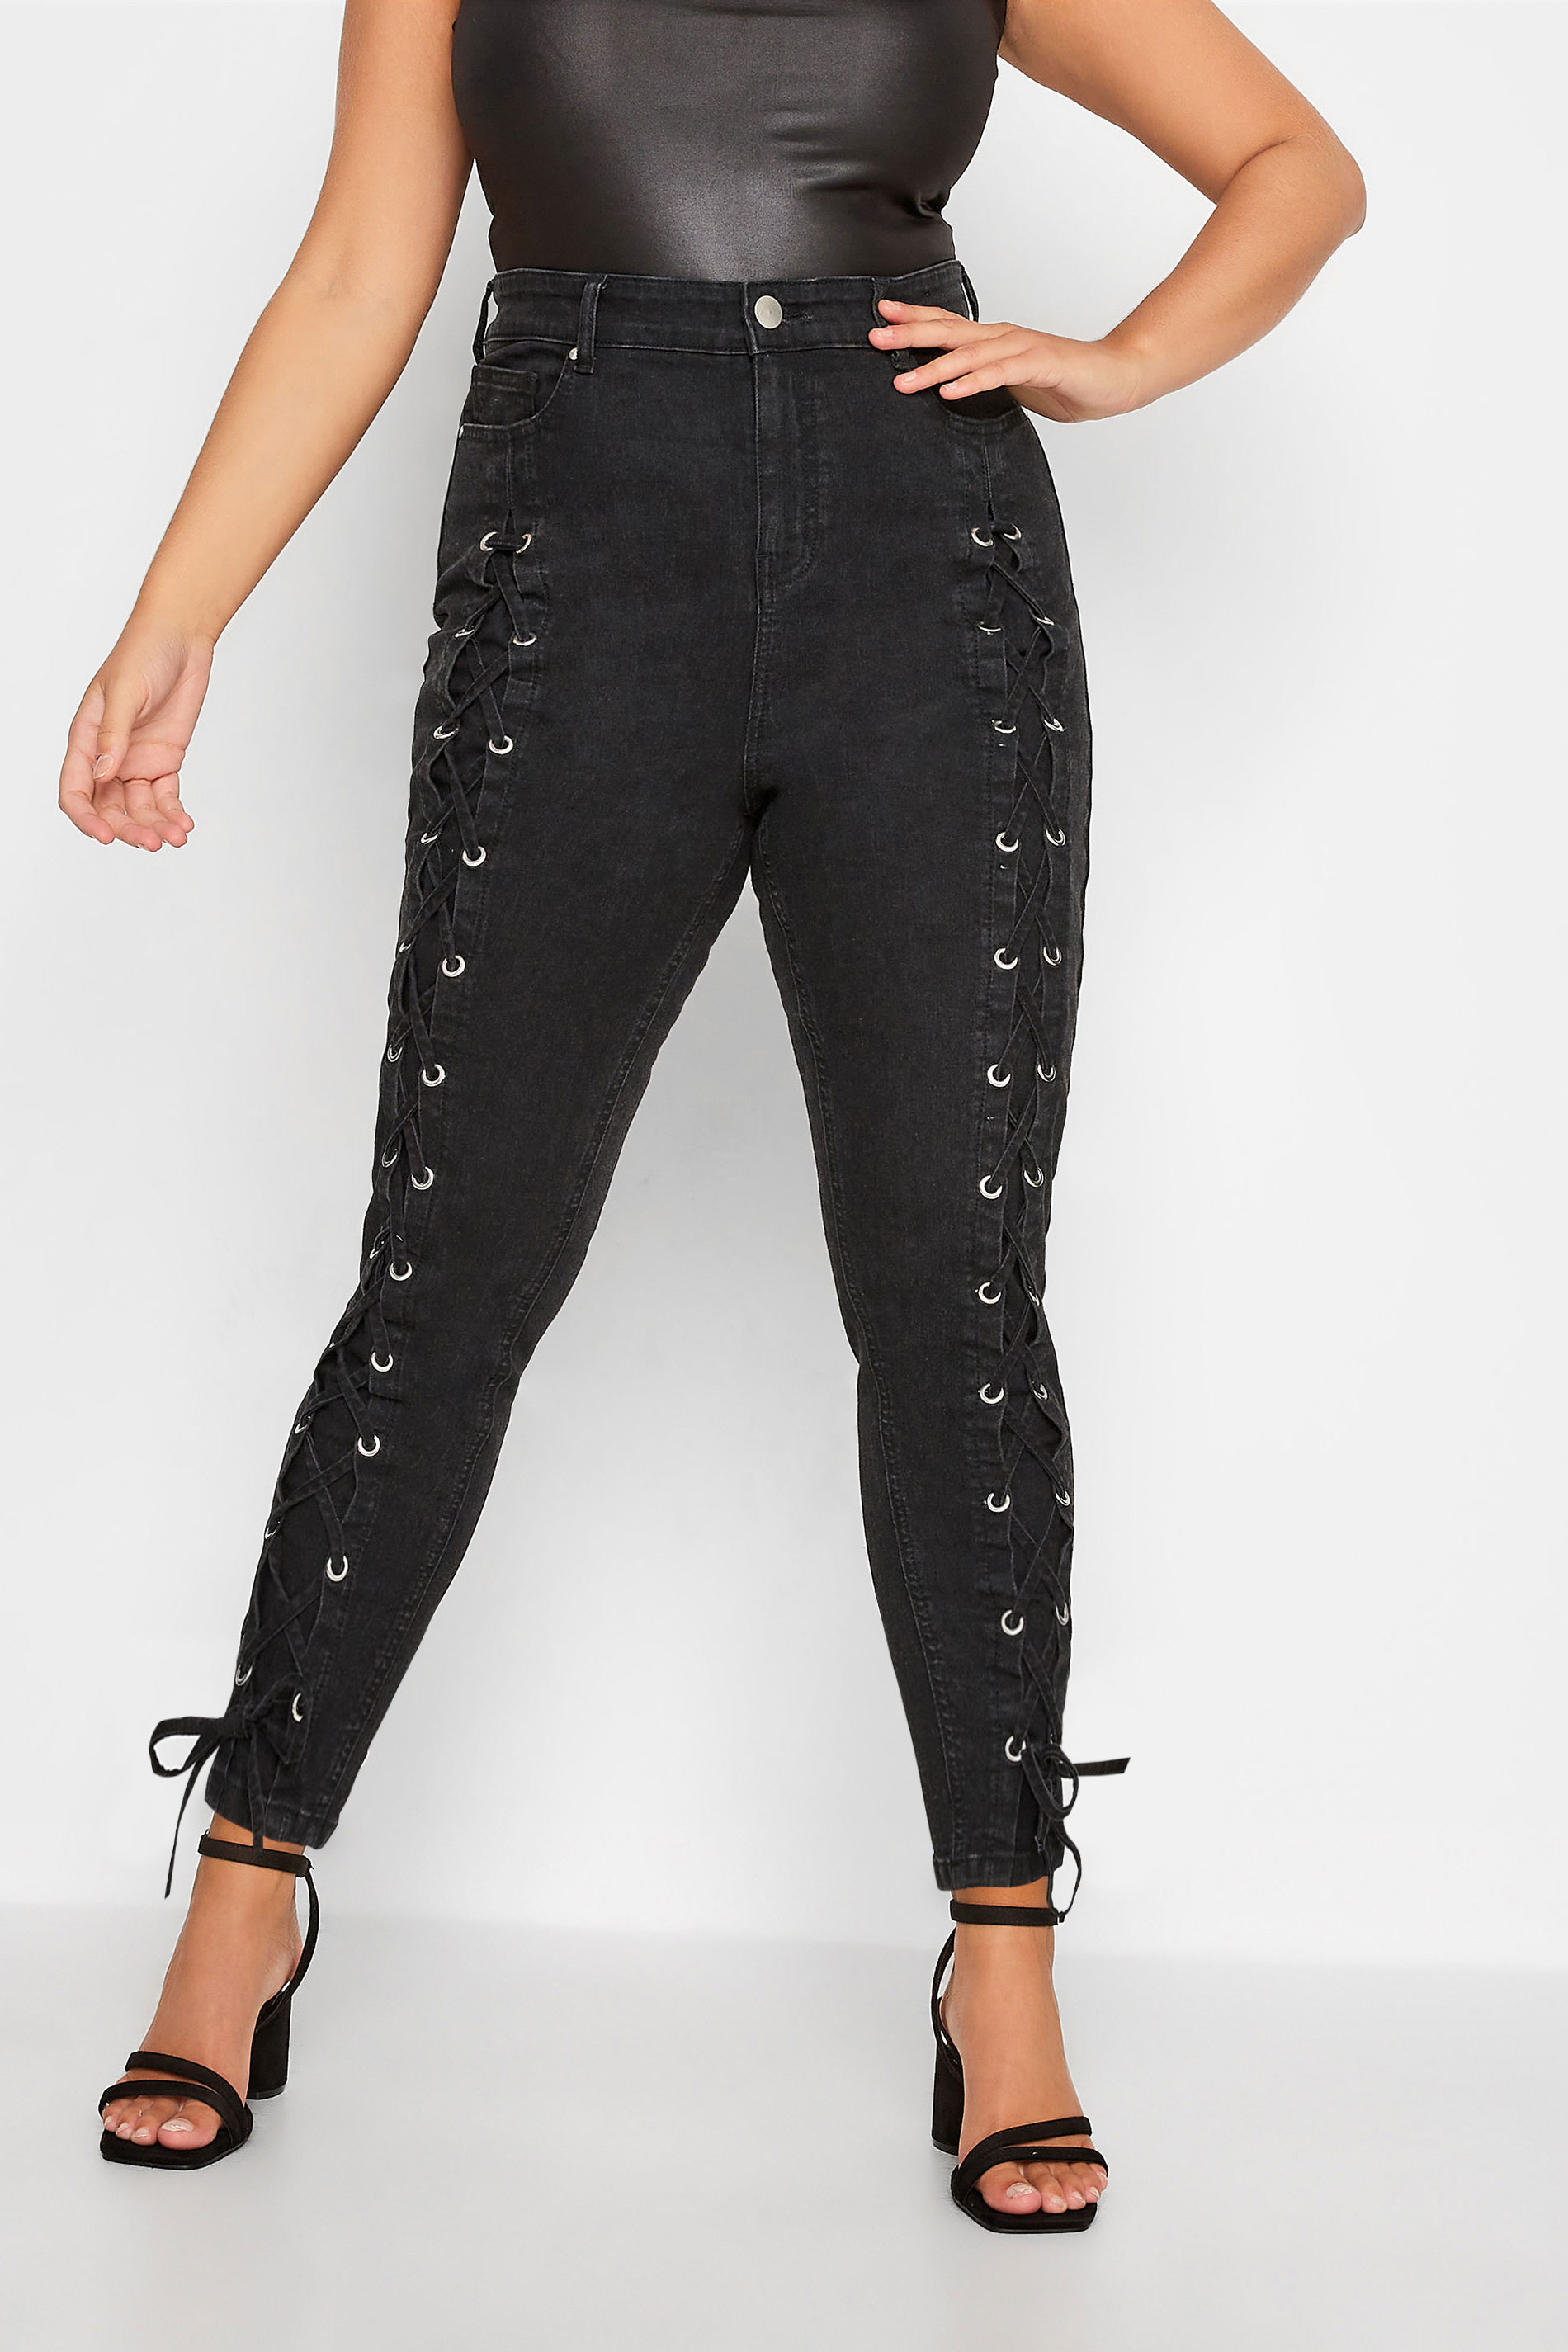 Plus Size Black Lace Up Skinny Stretch AVA Jeans | Yours Clothing 1